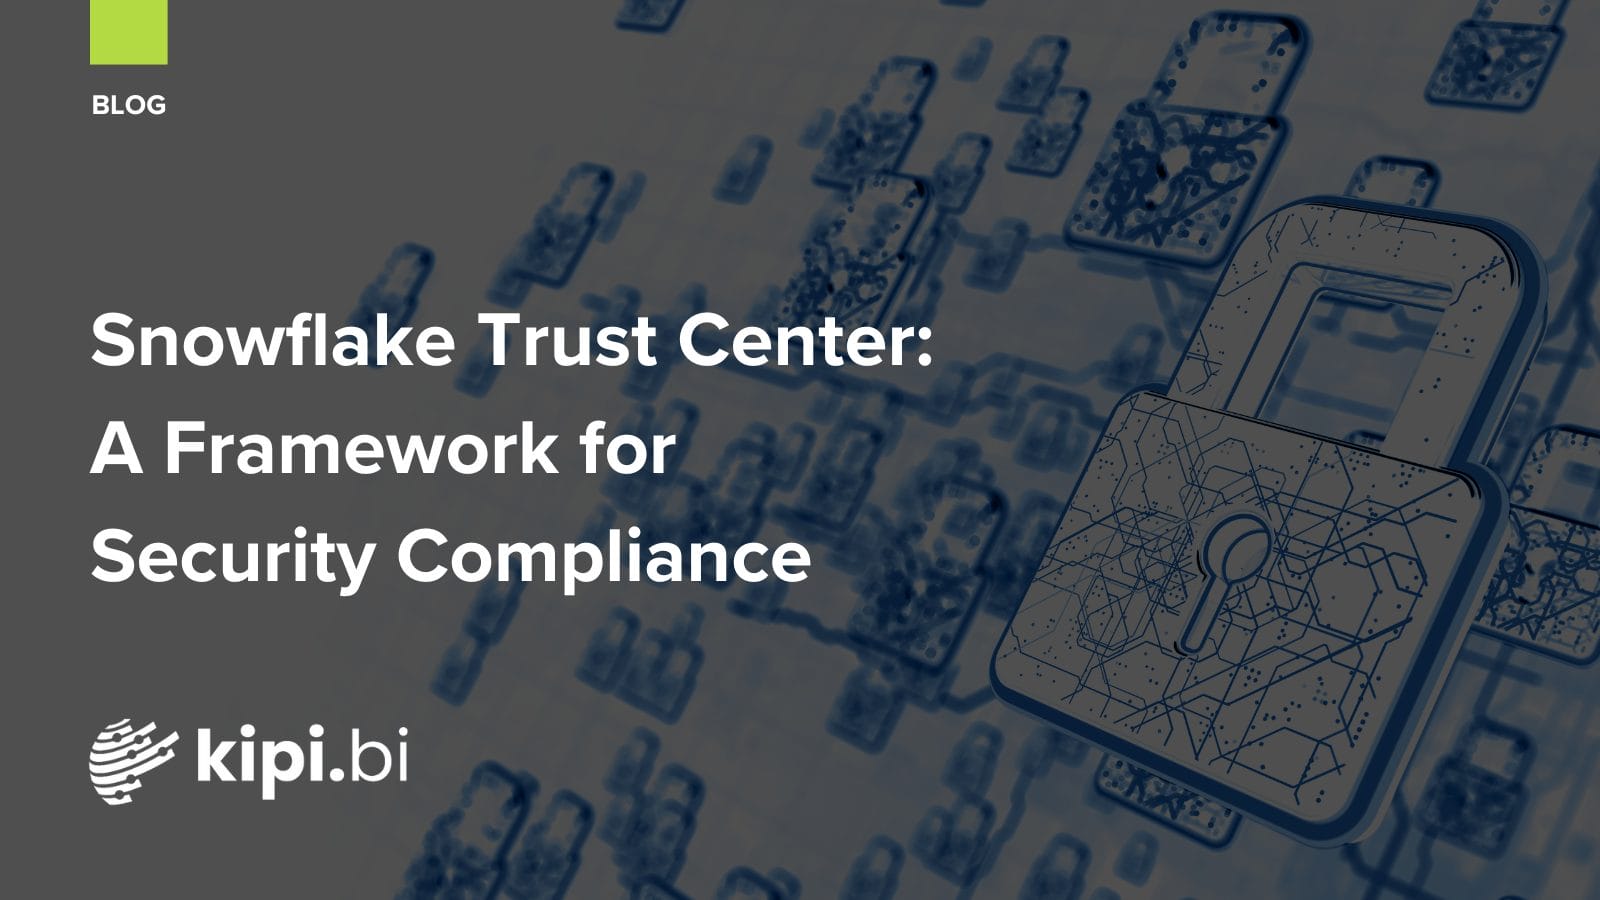 Snowflake Trust Center: A Framework for Security Compliance